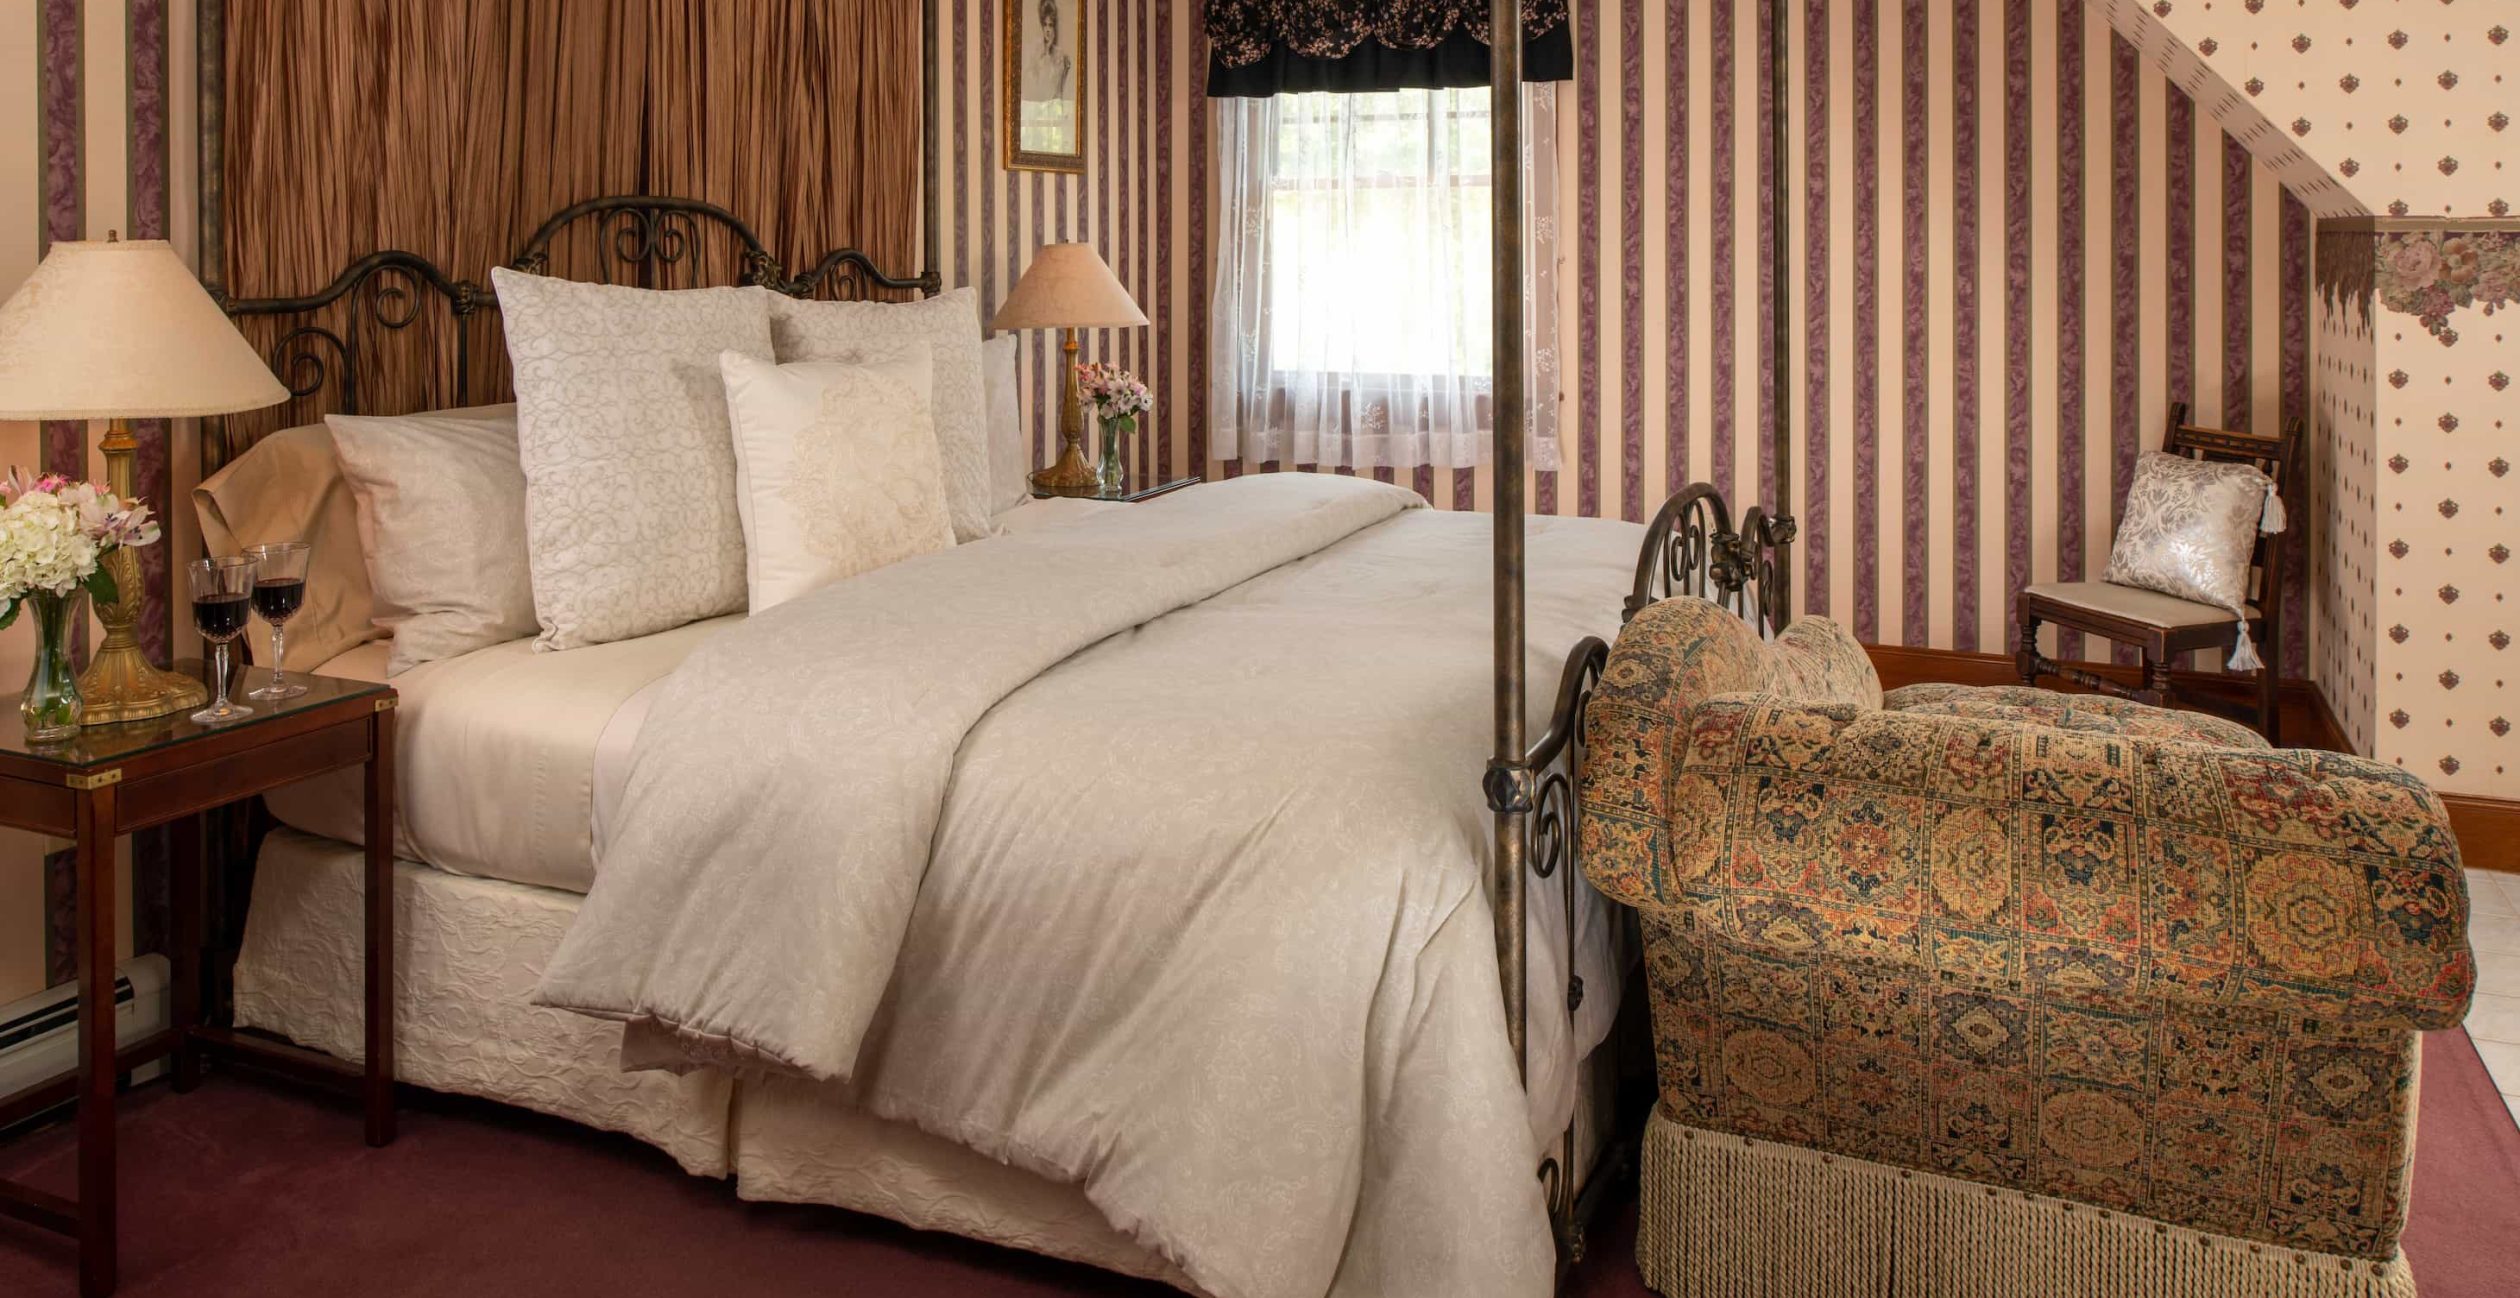 Henry James Room at Falmouth, MA boutique hotel